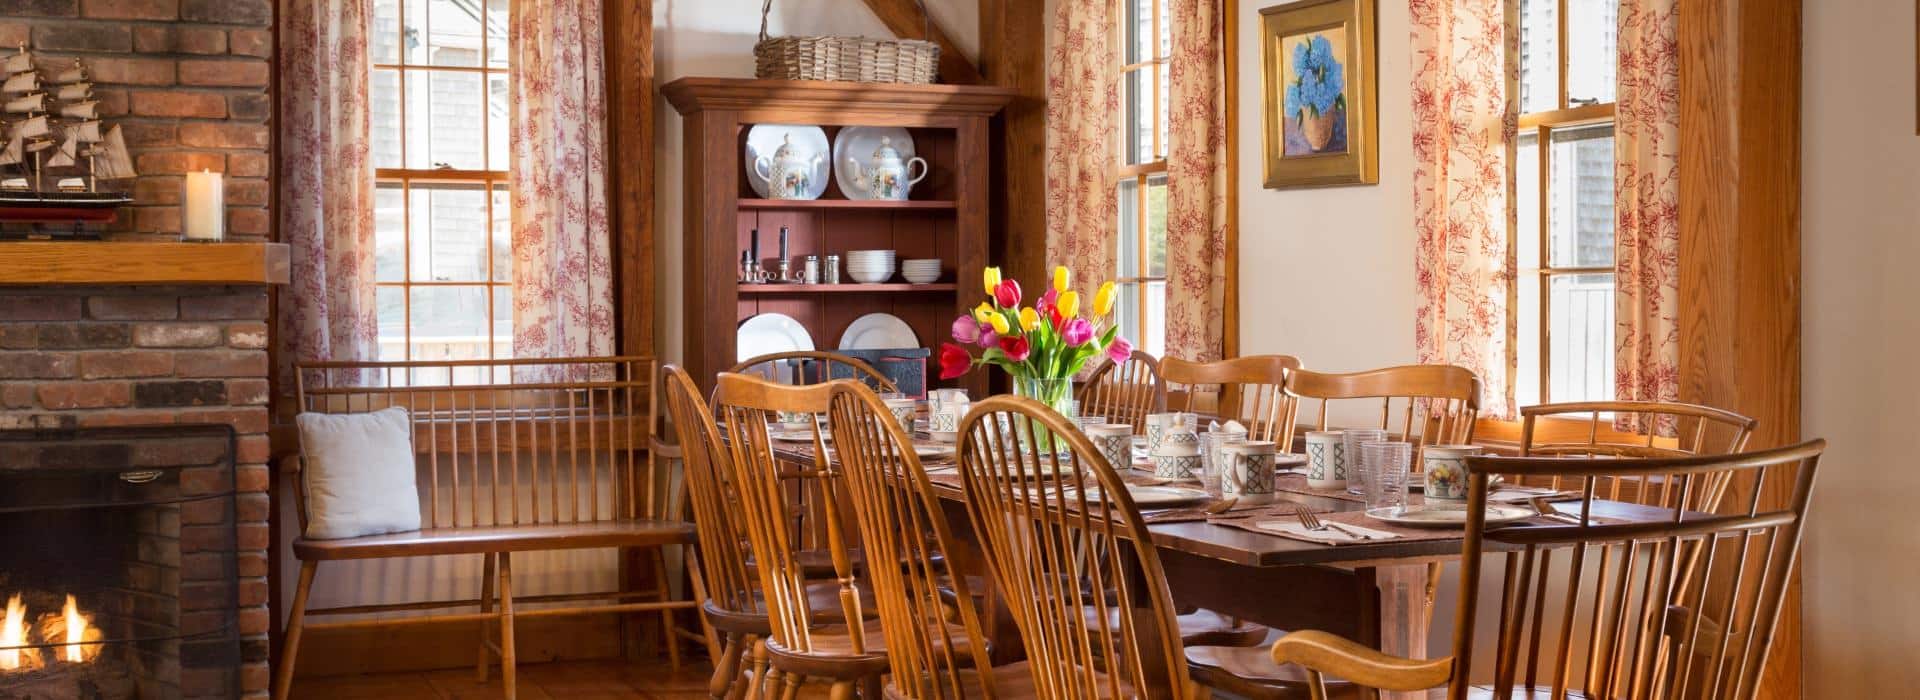 Dining room with brick fireplace and large wooden table and chairs with red, yellow and purple tulips in a vase on top